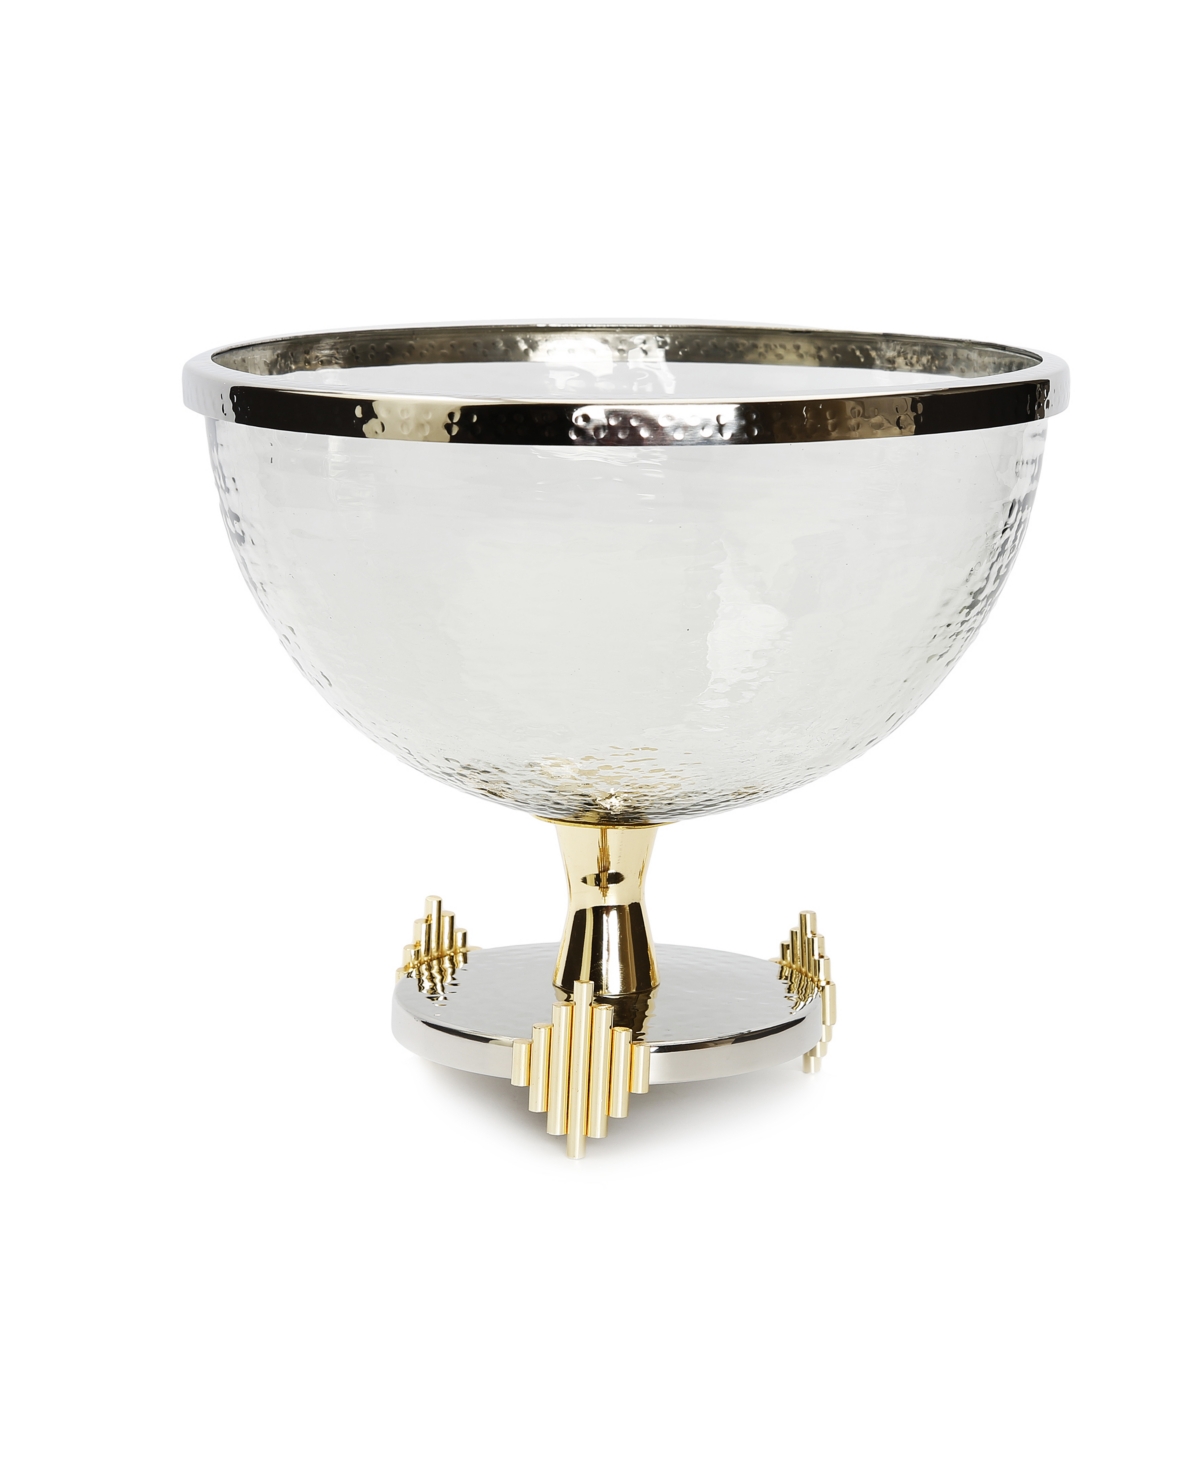 Stainless Steel Footed Glass Bowl with Symmetrical Design - Gold